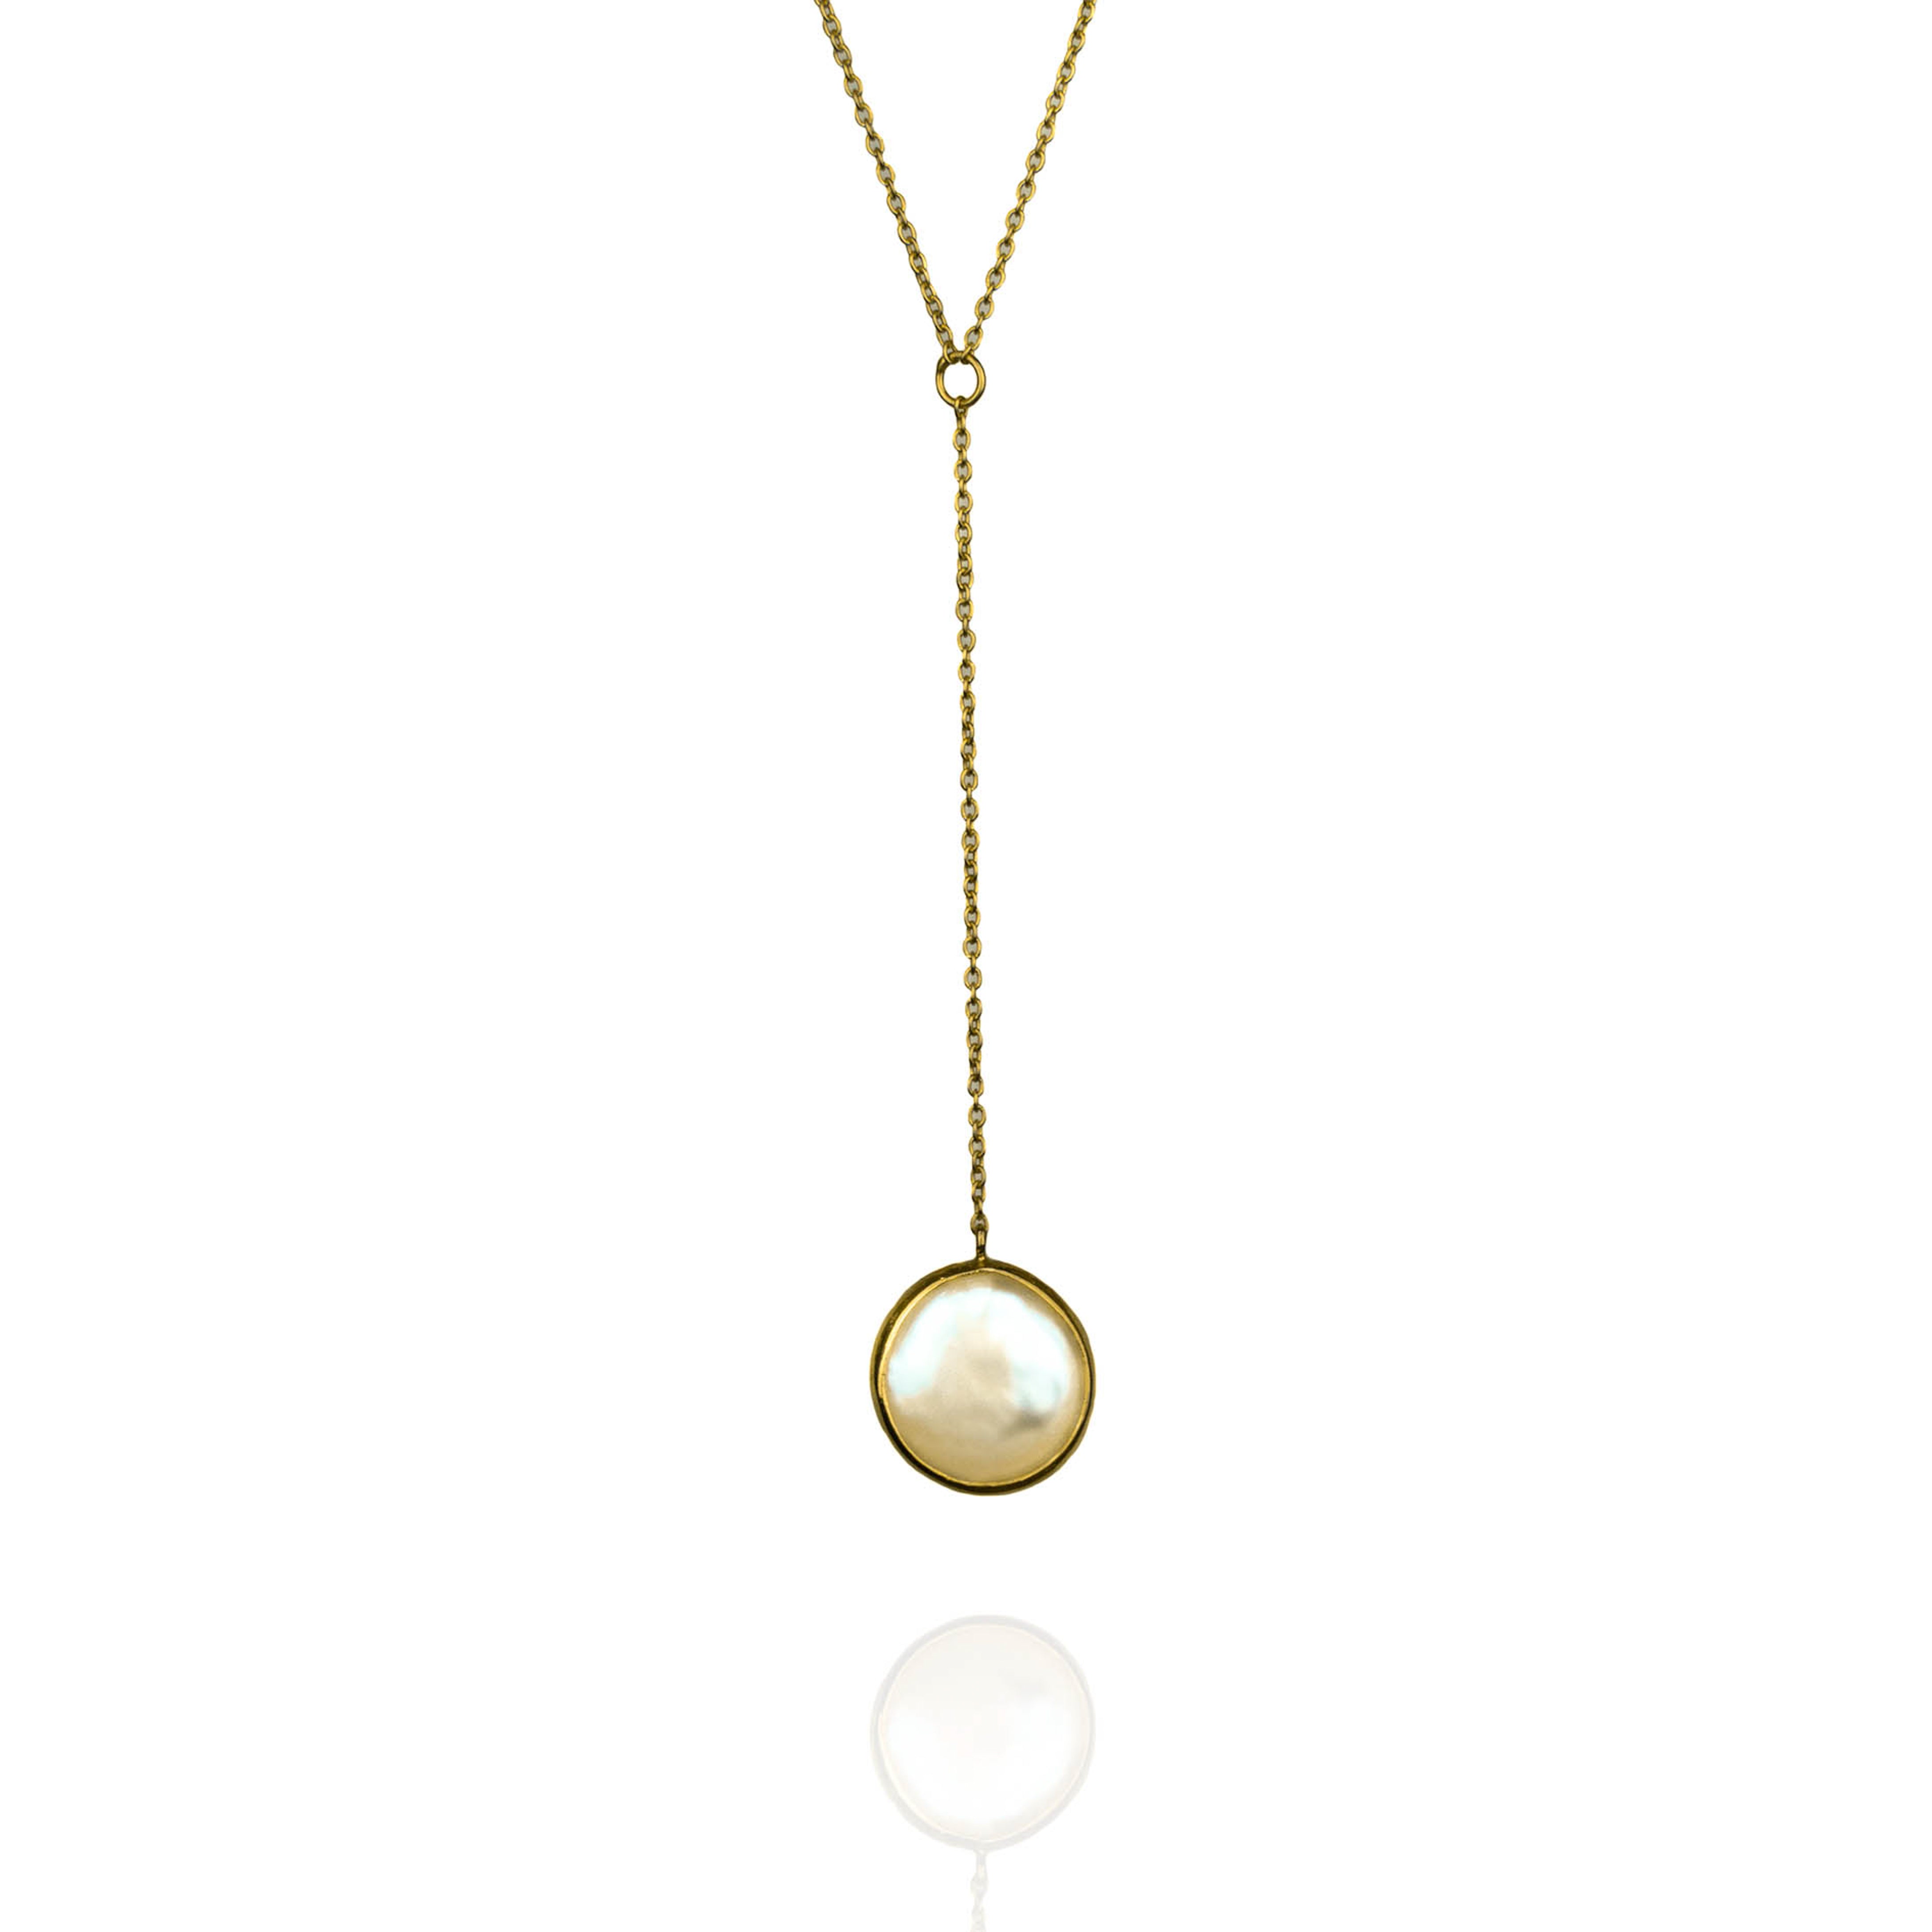 Fine gold necklace with an extension chain and pearl for a deep plunge neckline